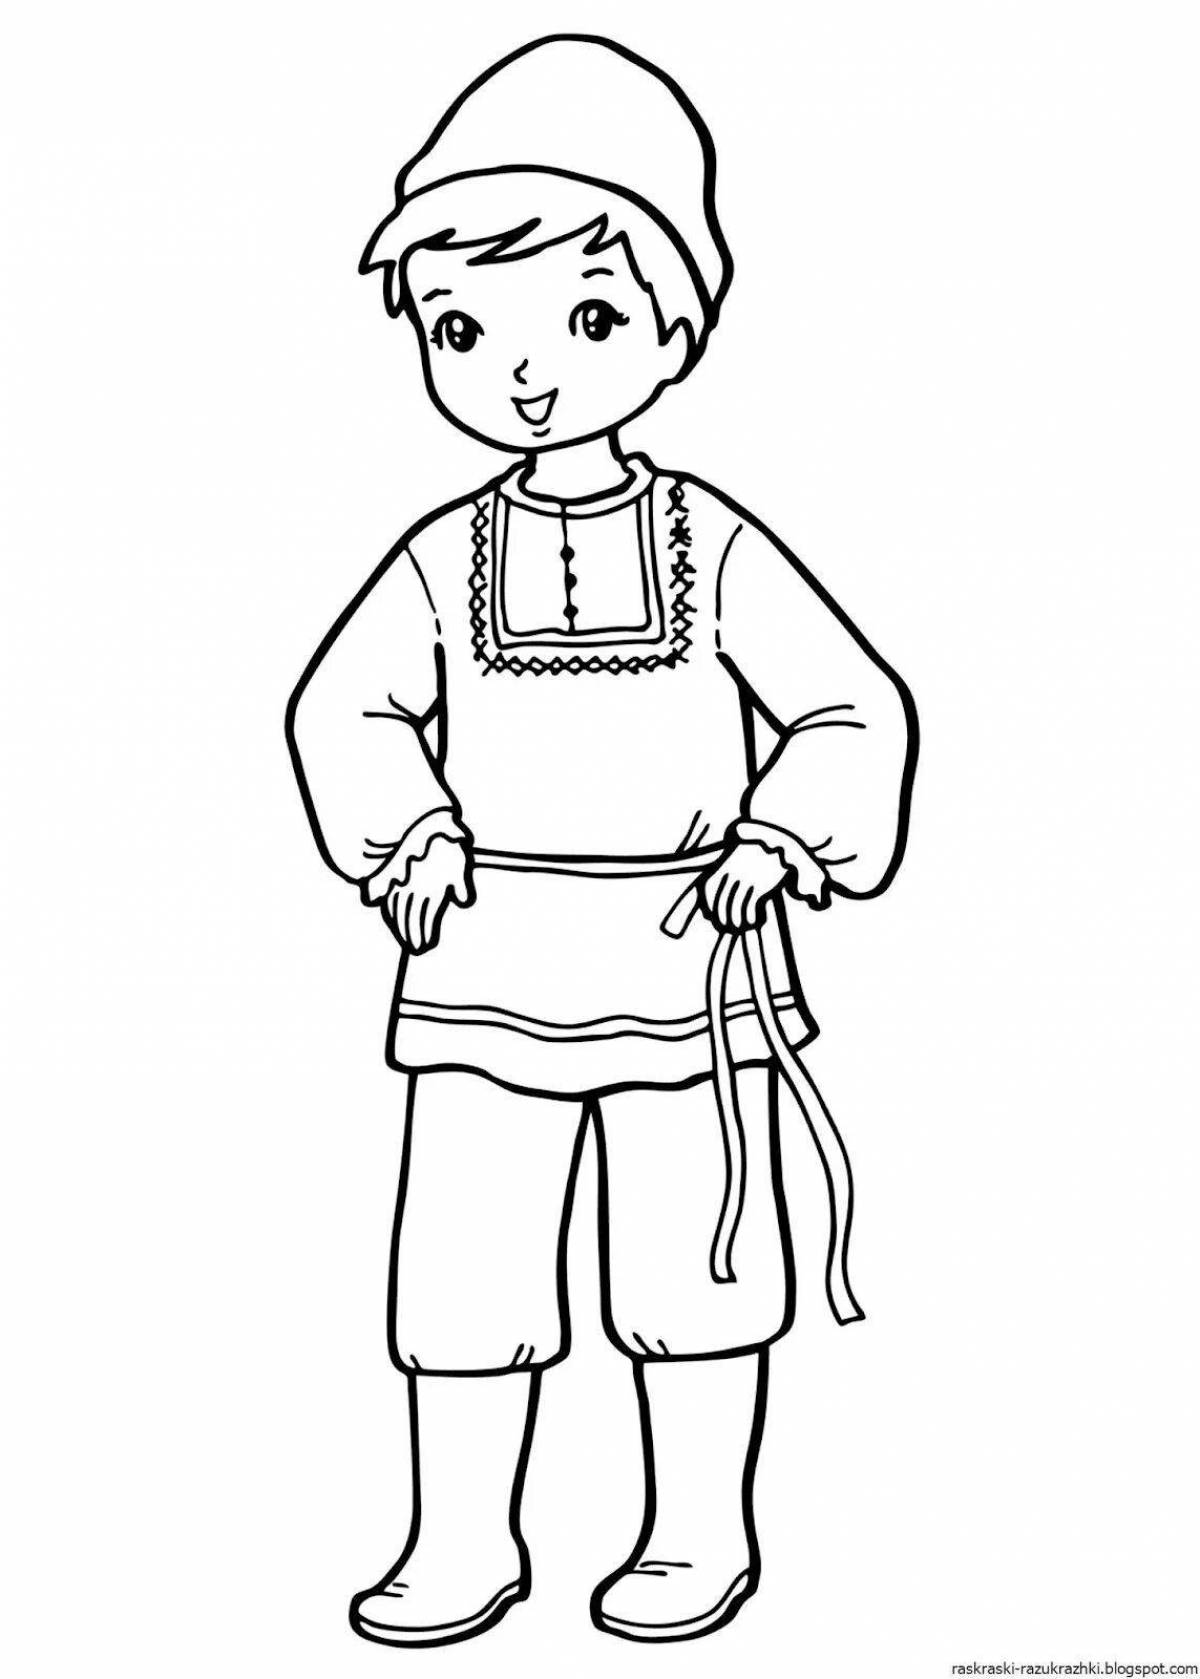 Coloring page cute belarusian clothes for kids